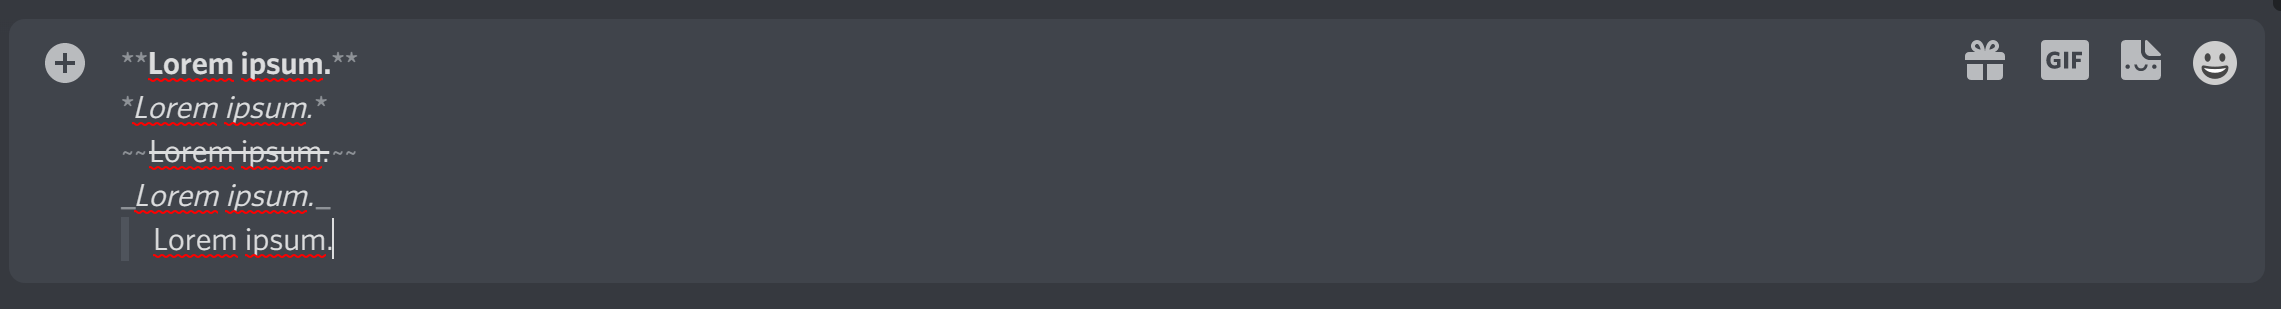 discord-text-styling.PNG